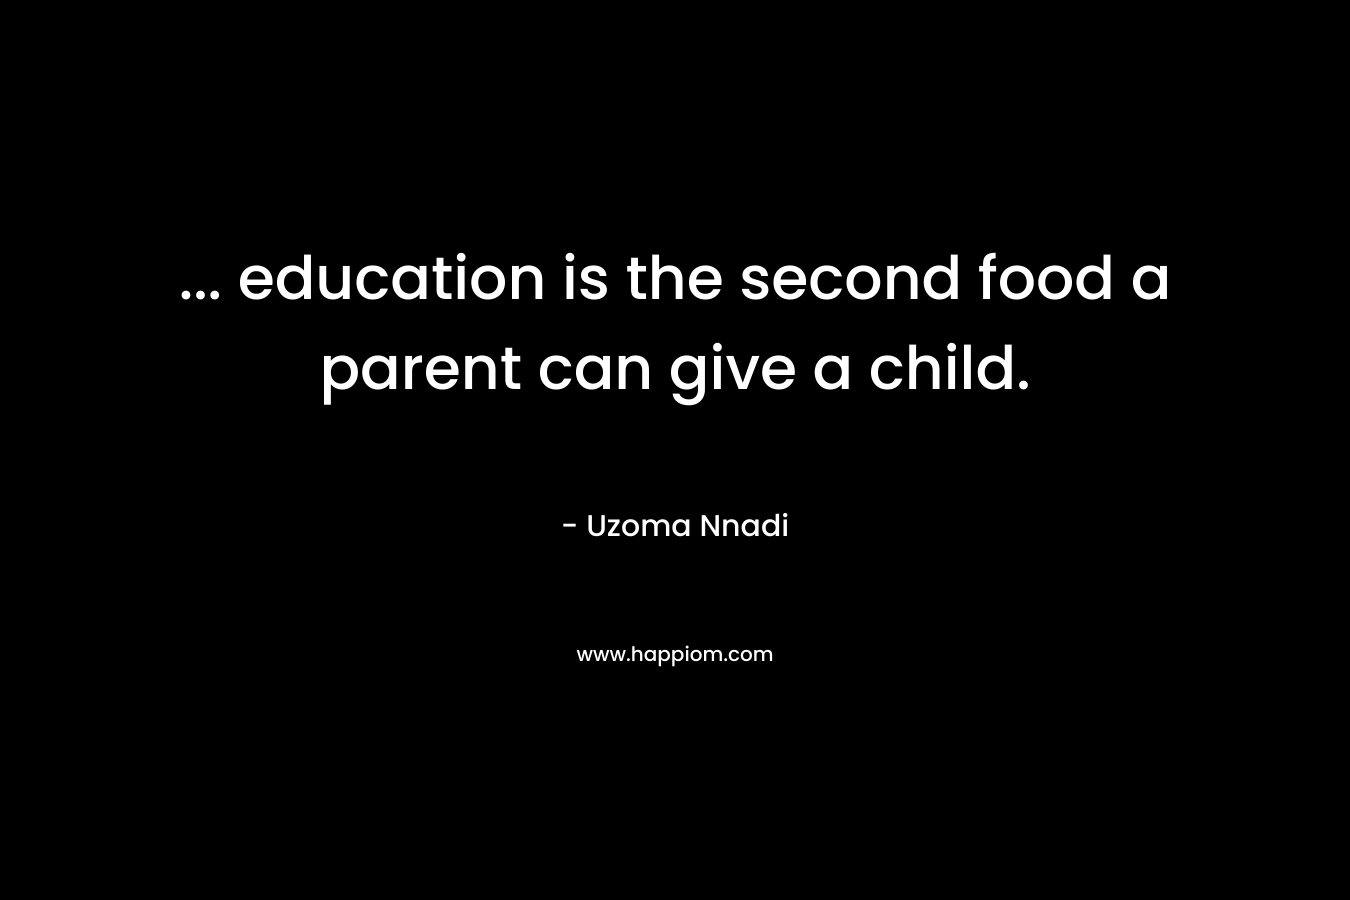 … education is the second food a parent can give a child. – Uzoma Nnadi